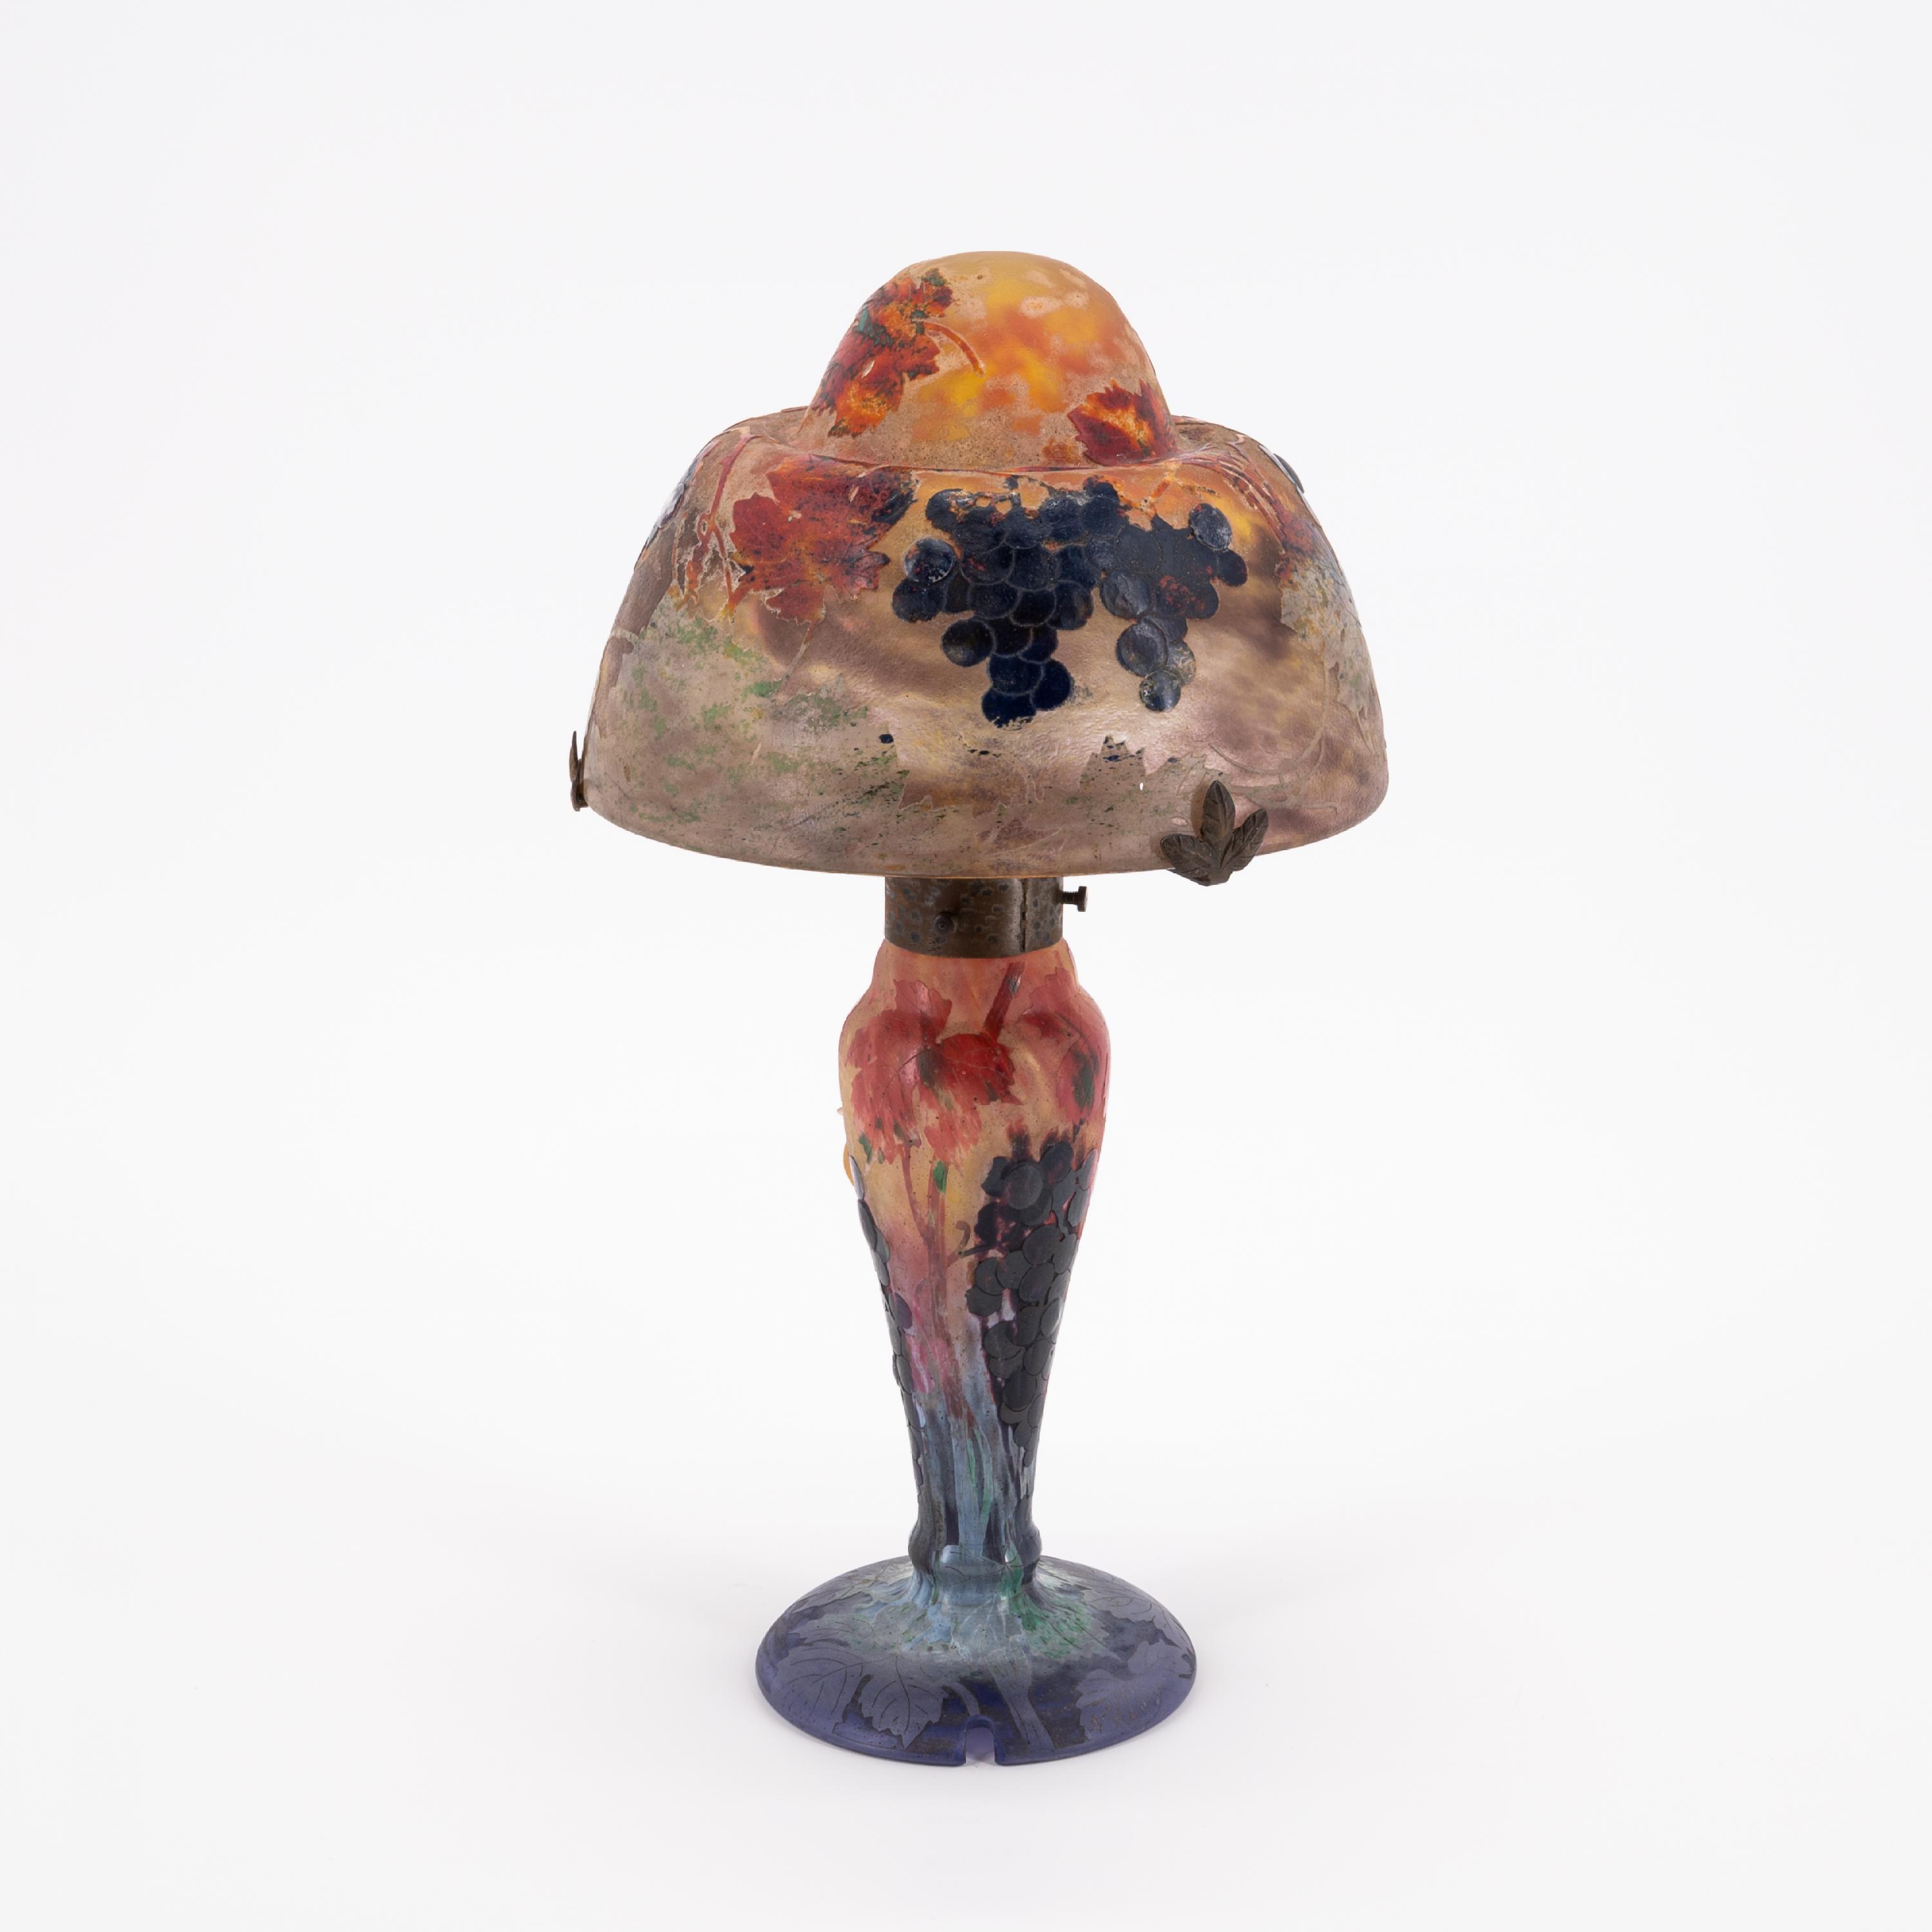 RARE GLASS TABLE LAMP 'VIGNE ET ESCARGOTS' WITH A SNAIL - Image 3 of 10